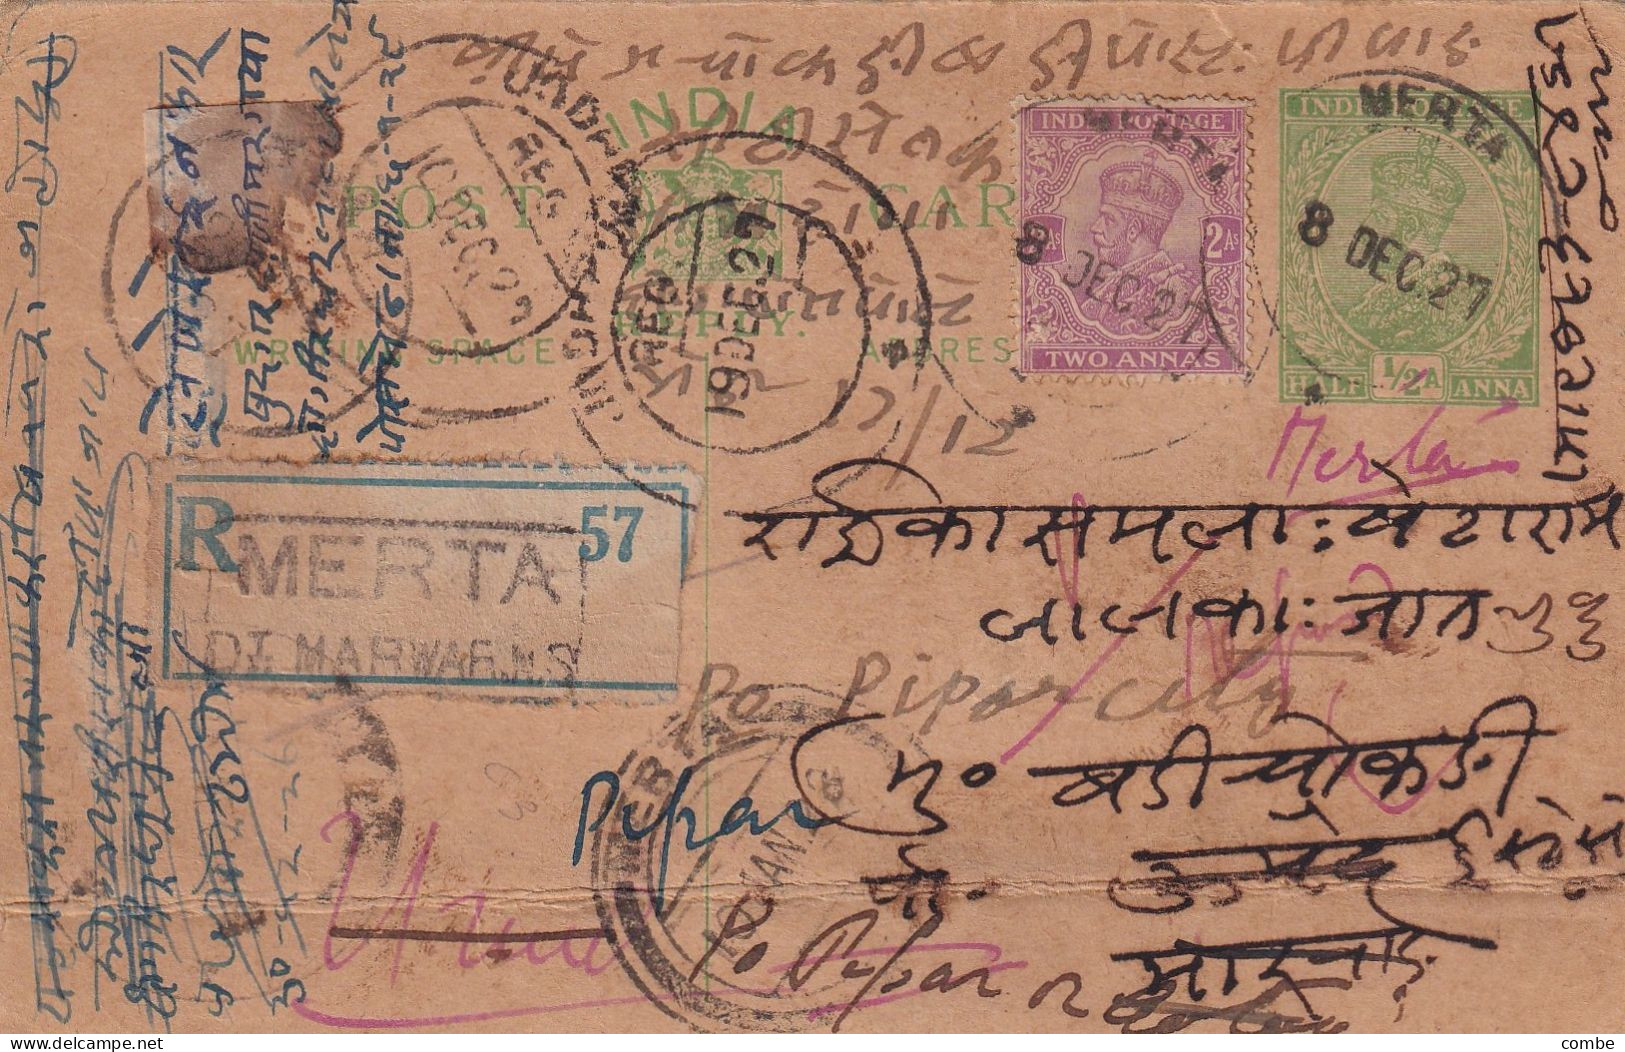 POSTCARD INDIA. 8 12 1927. STATIONNERY 1/2A + 2As. REGISTERED MERTA. ATTEMPTED DELIVERY 0N 10 DEC . 19 DEC REFUSED...... - 1911-35 Koning George V